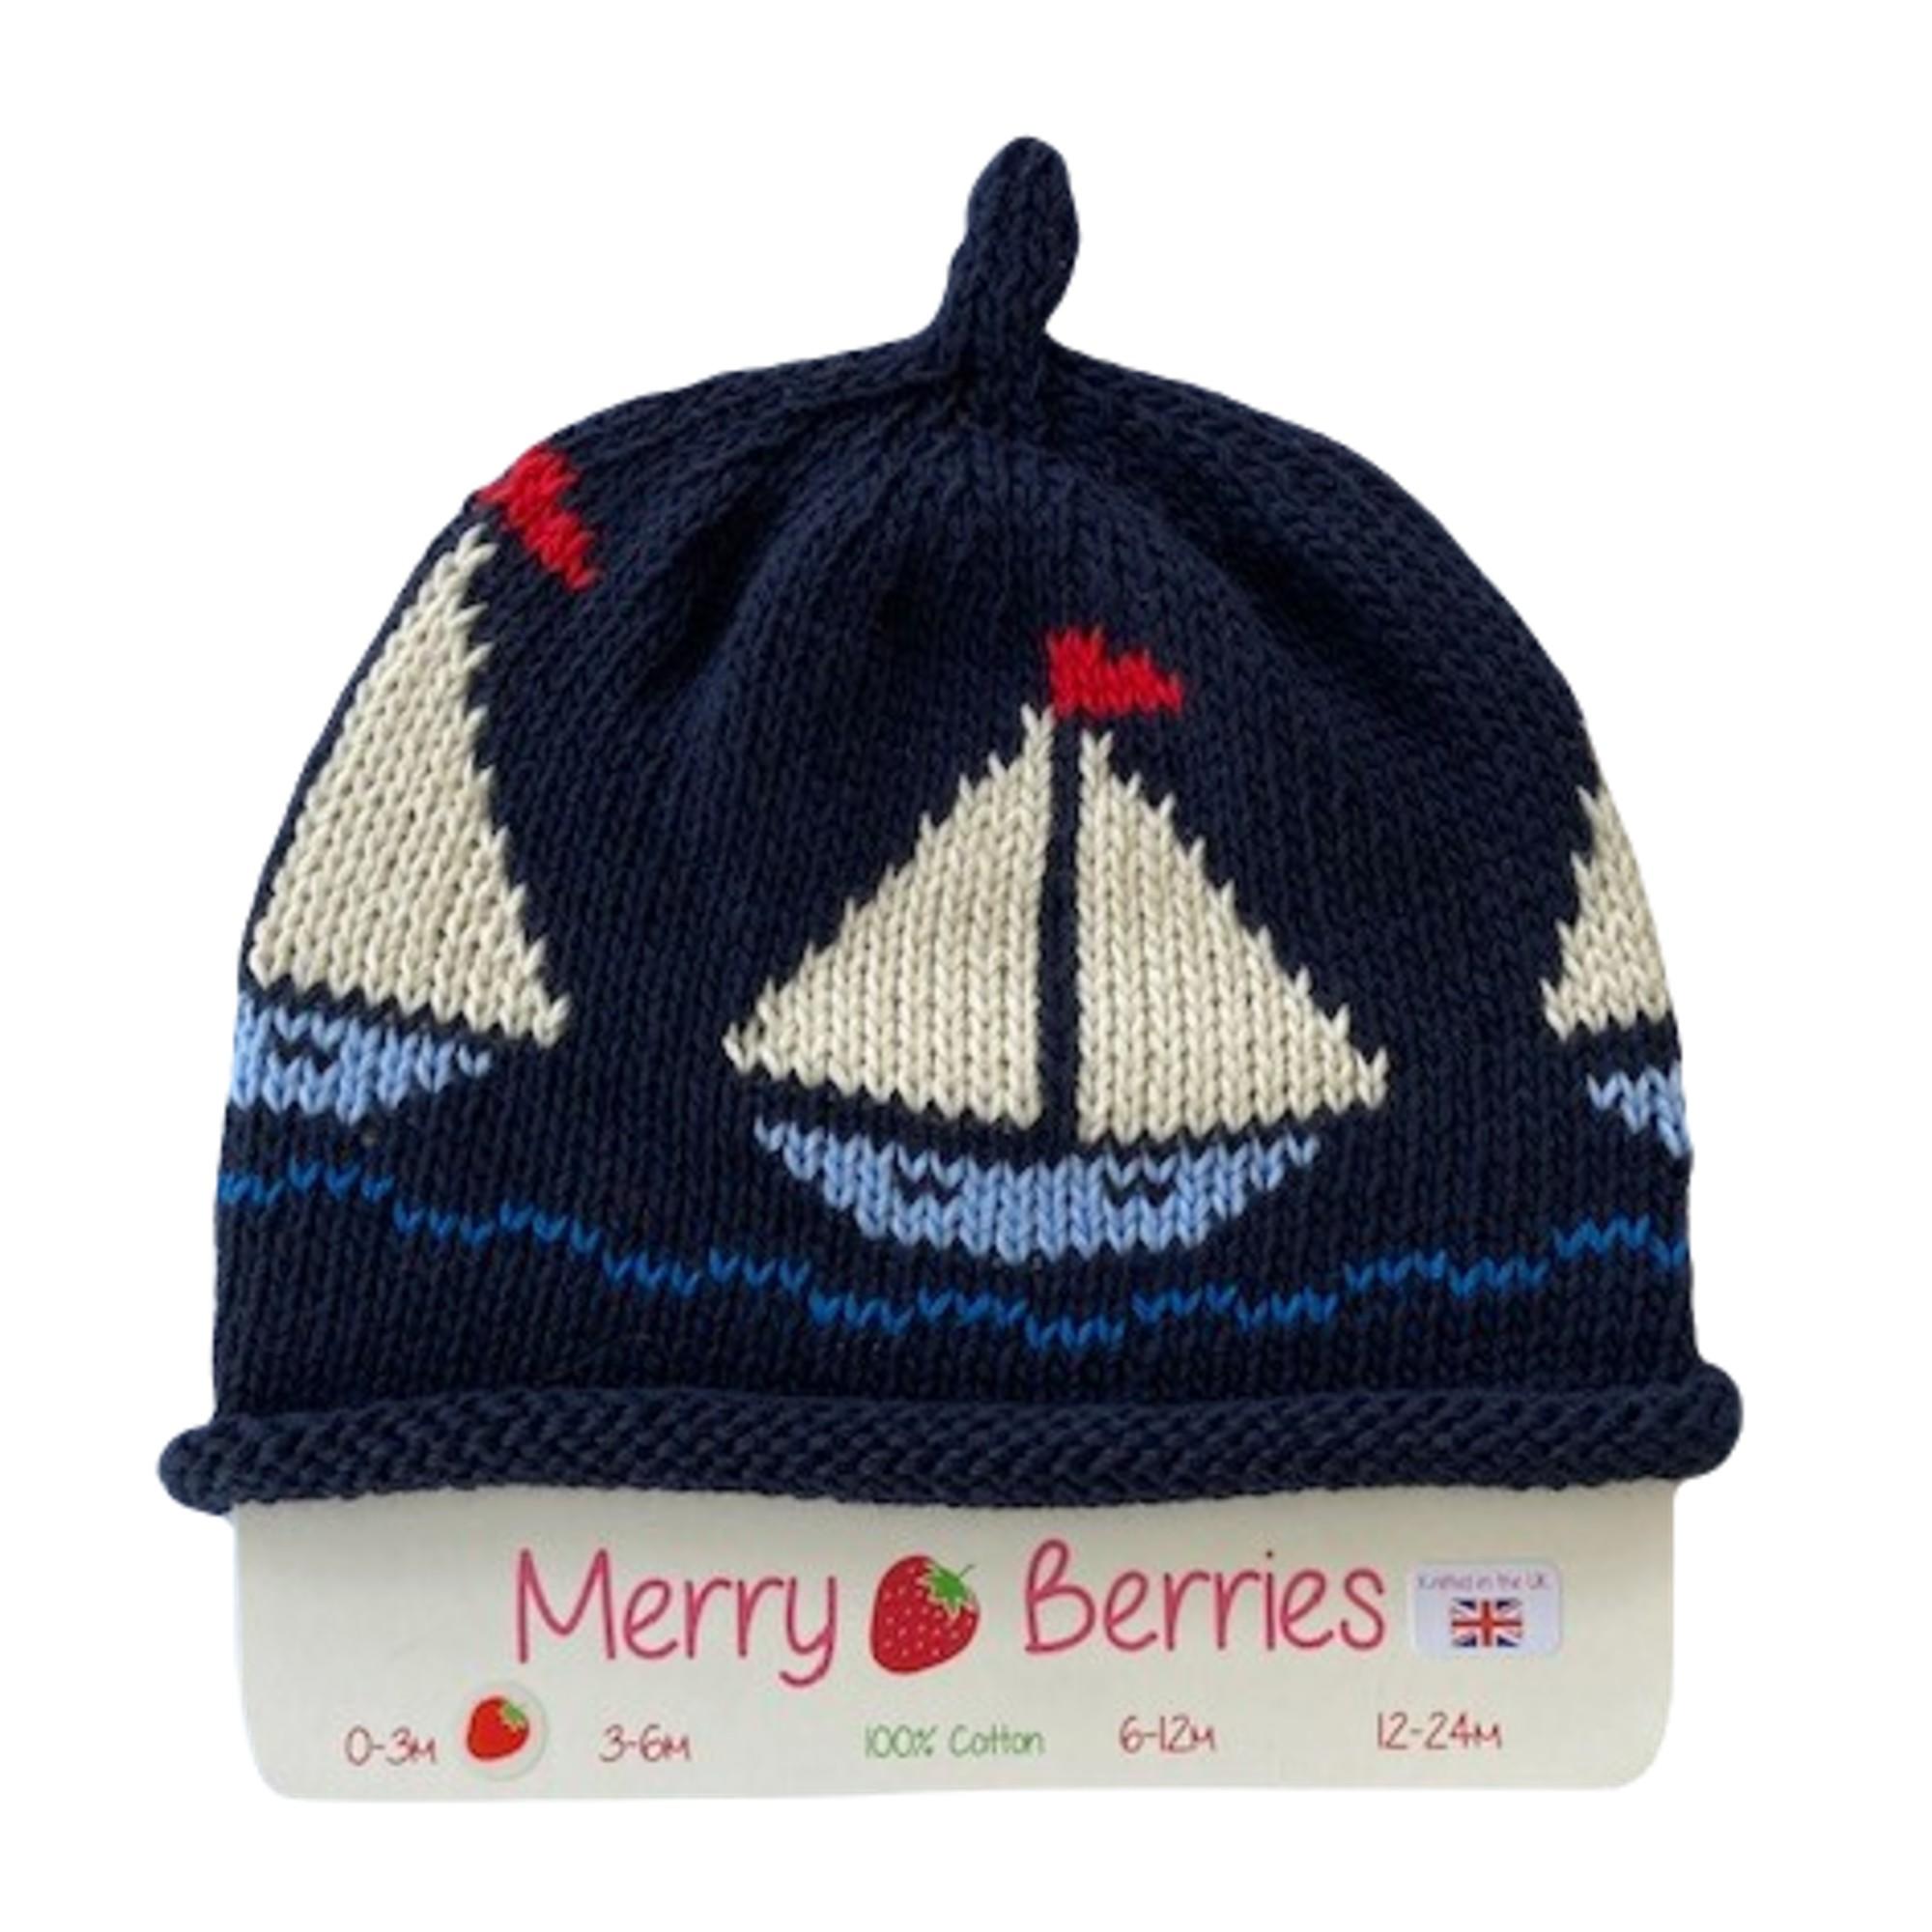 Merry Berries- Navy cream Boat Knitted Baby Hat- 0-24 Months- Cotton